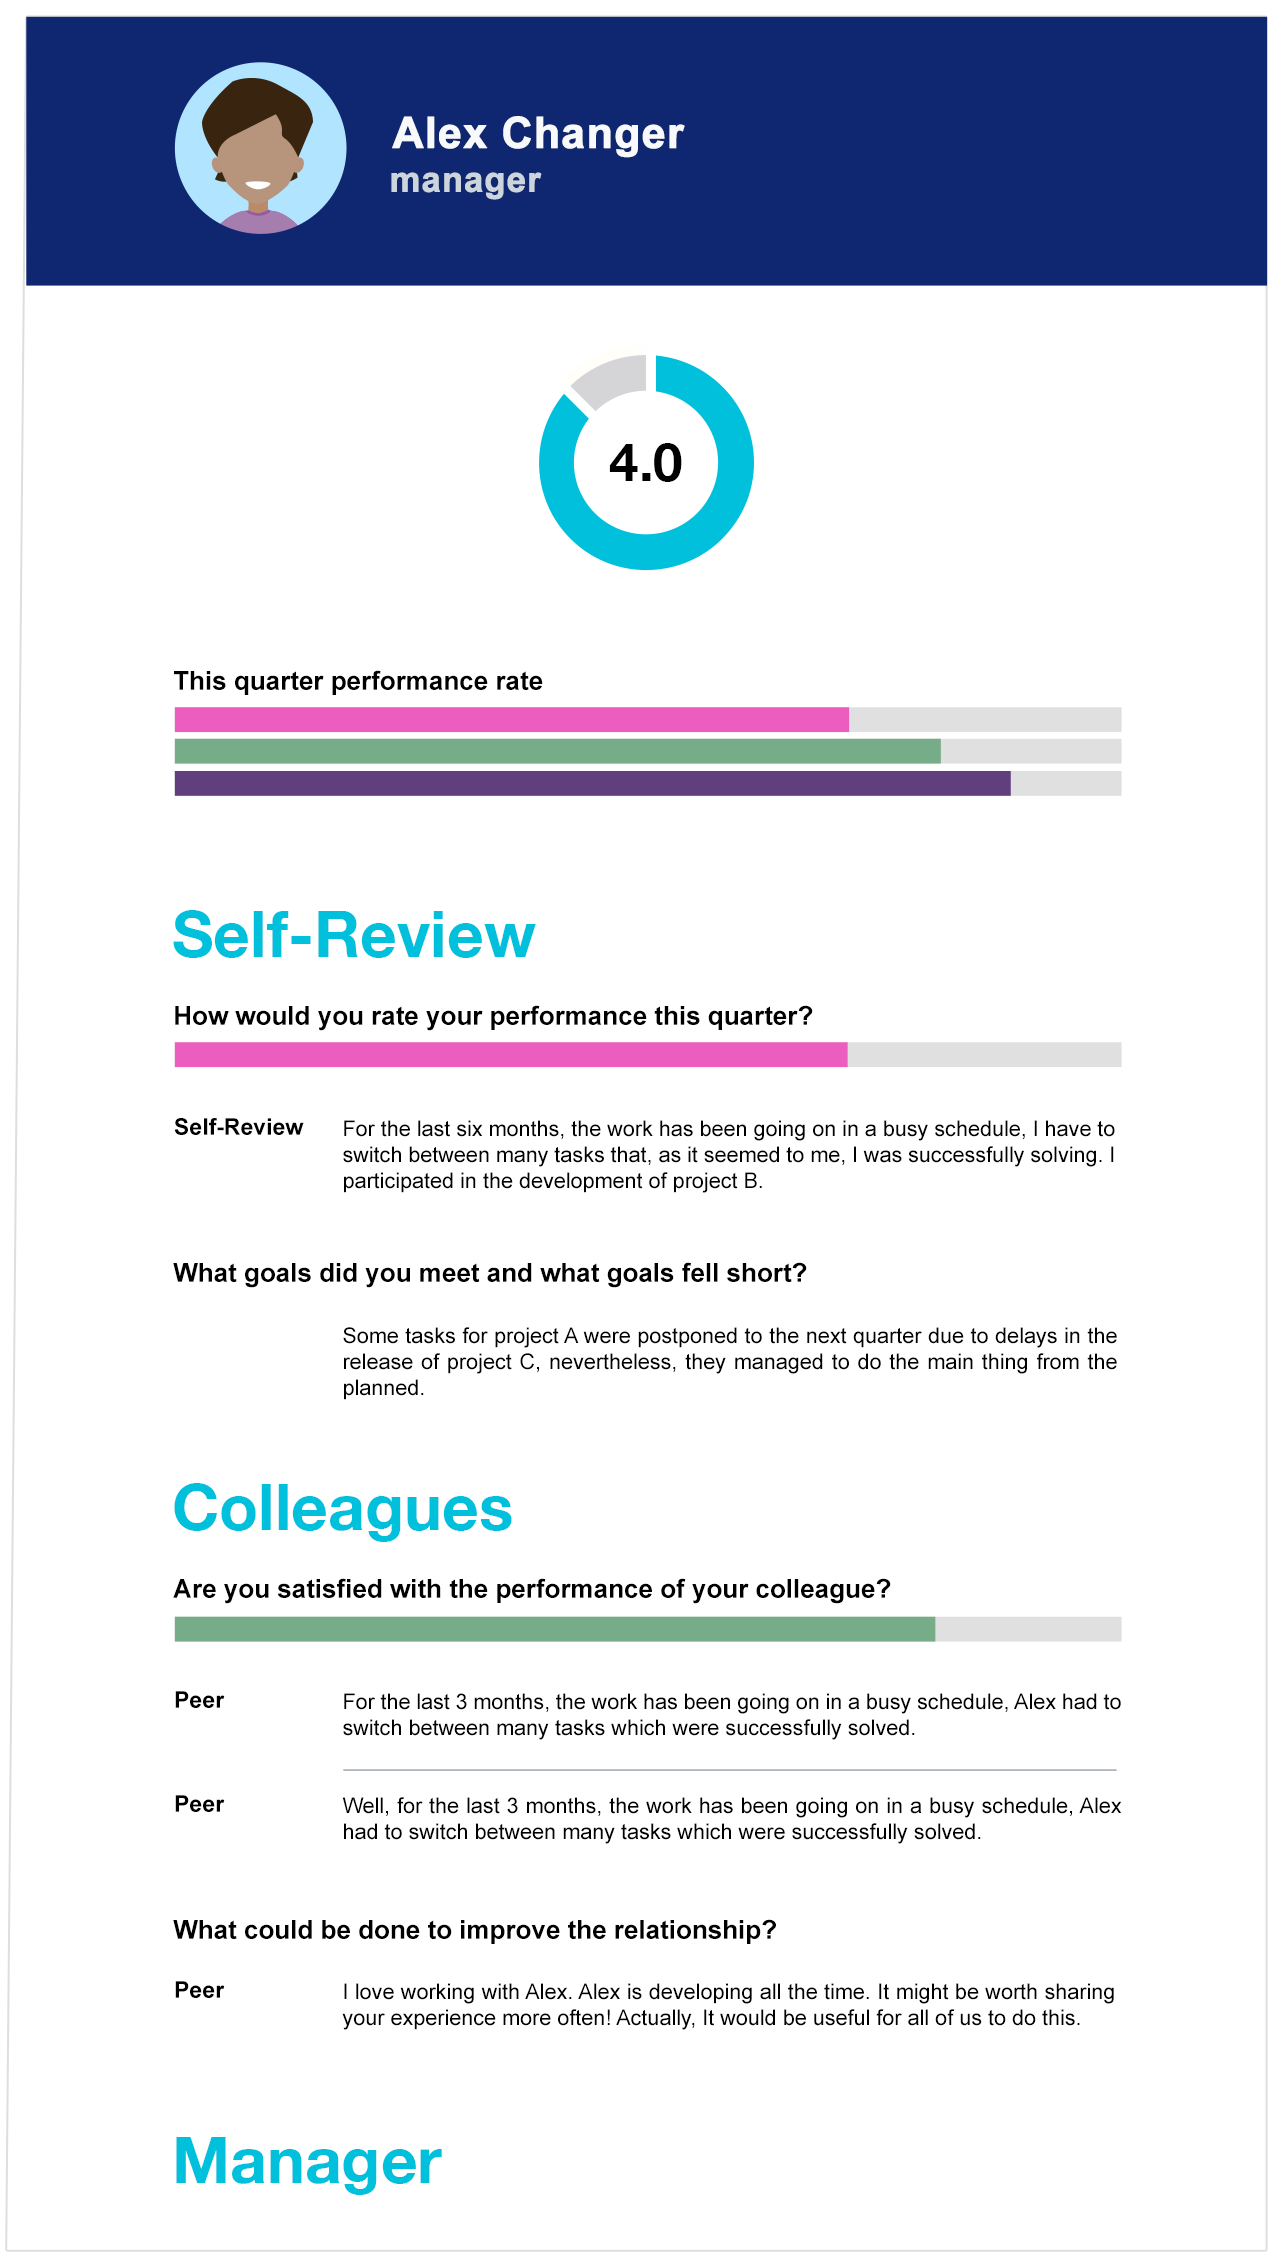 Performance review feedback tool